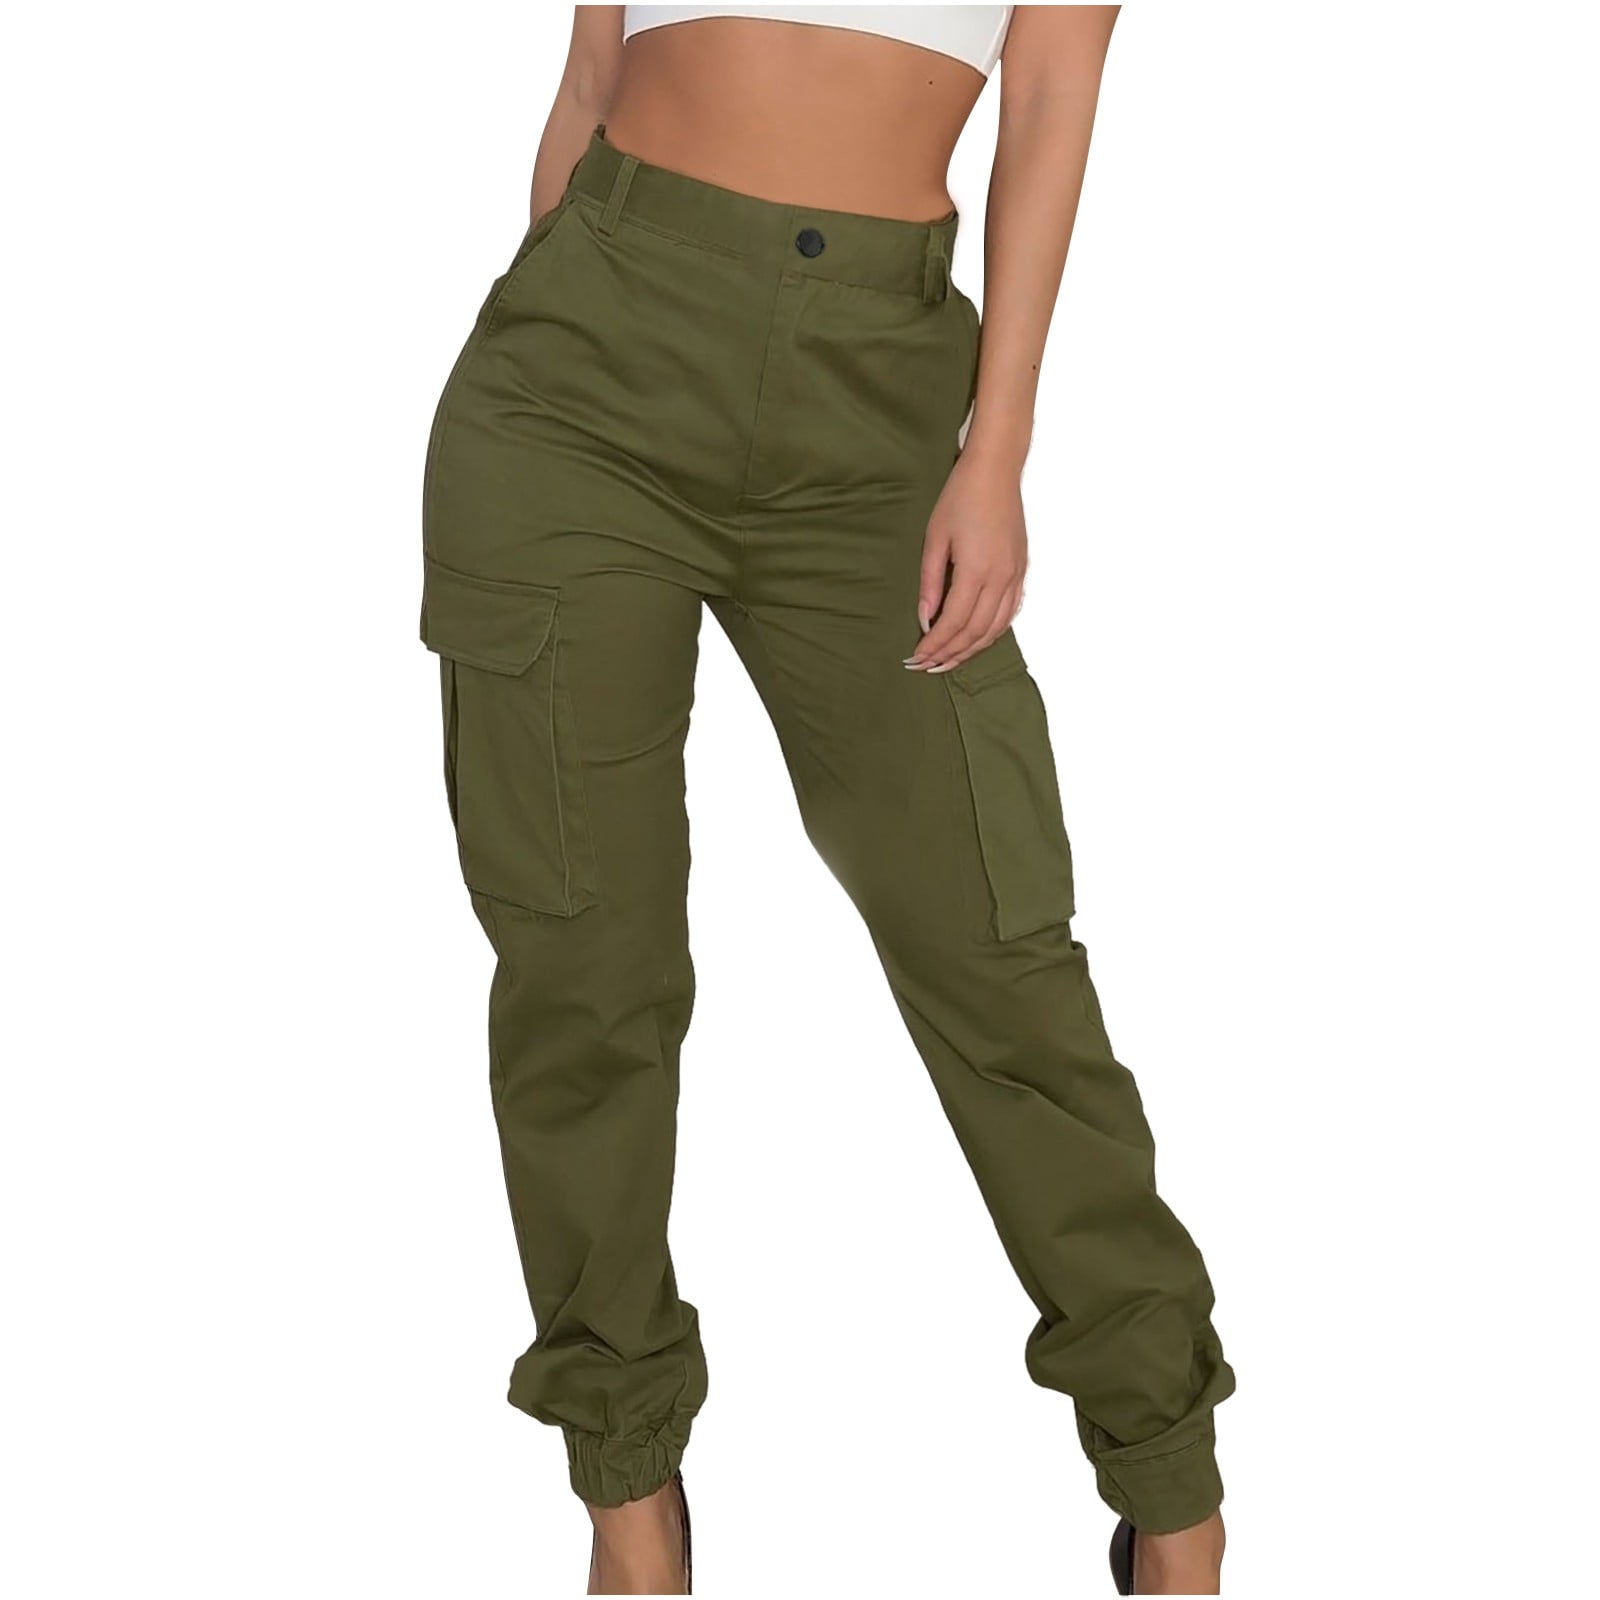 Ascent Cargo Pants, Women's Hiking Pants, Athletic Pants, Women's Clothing,  Workout Clothes, Outdoor Clothing